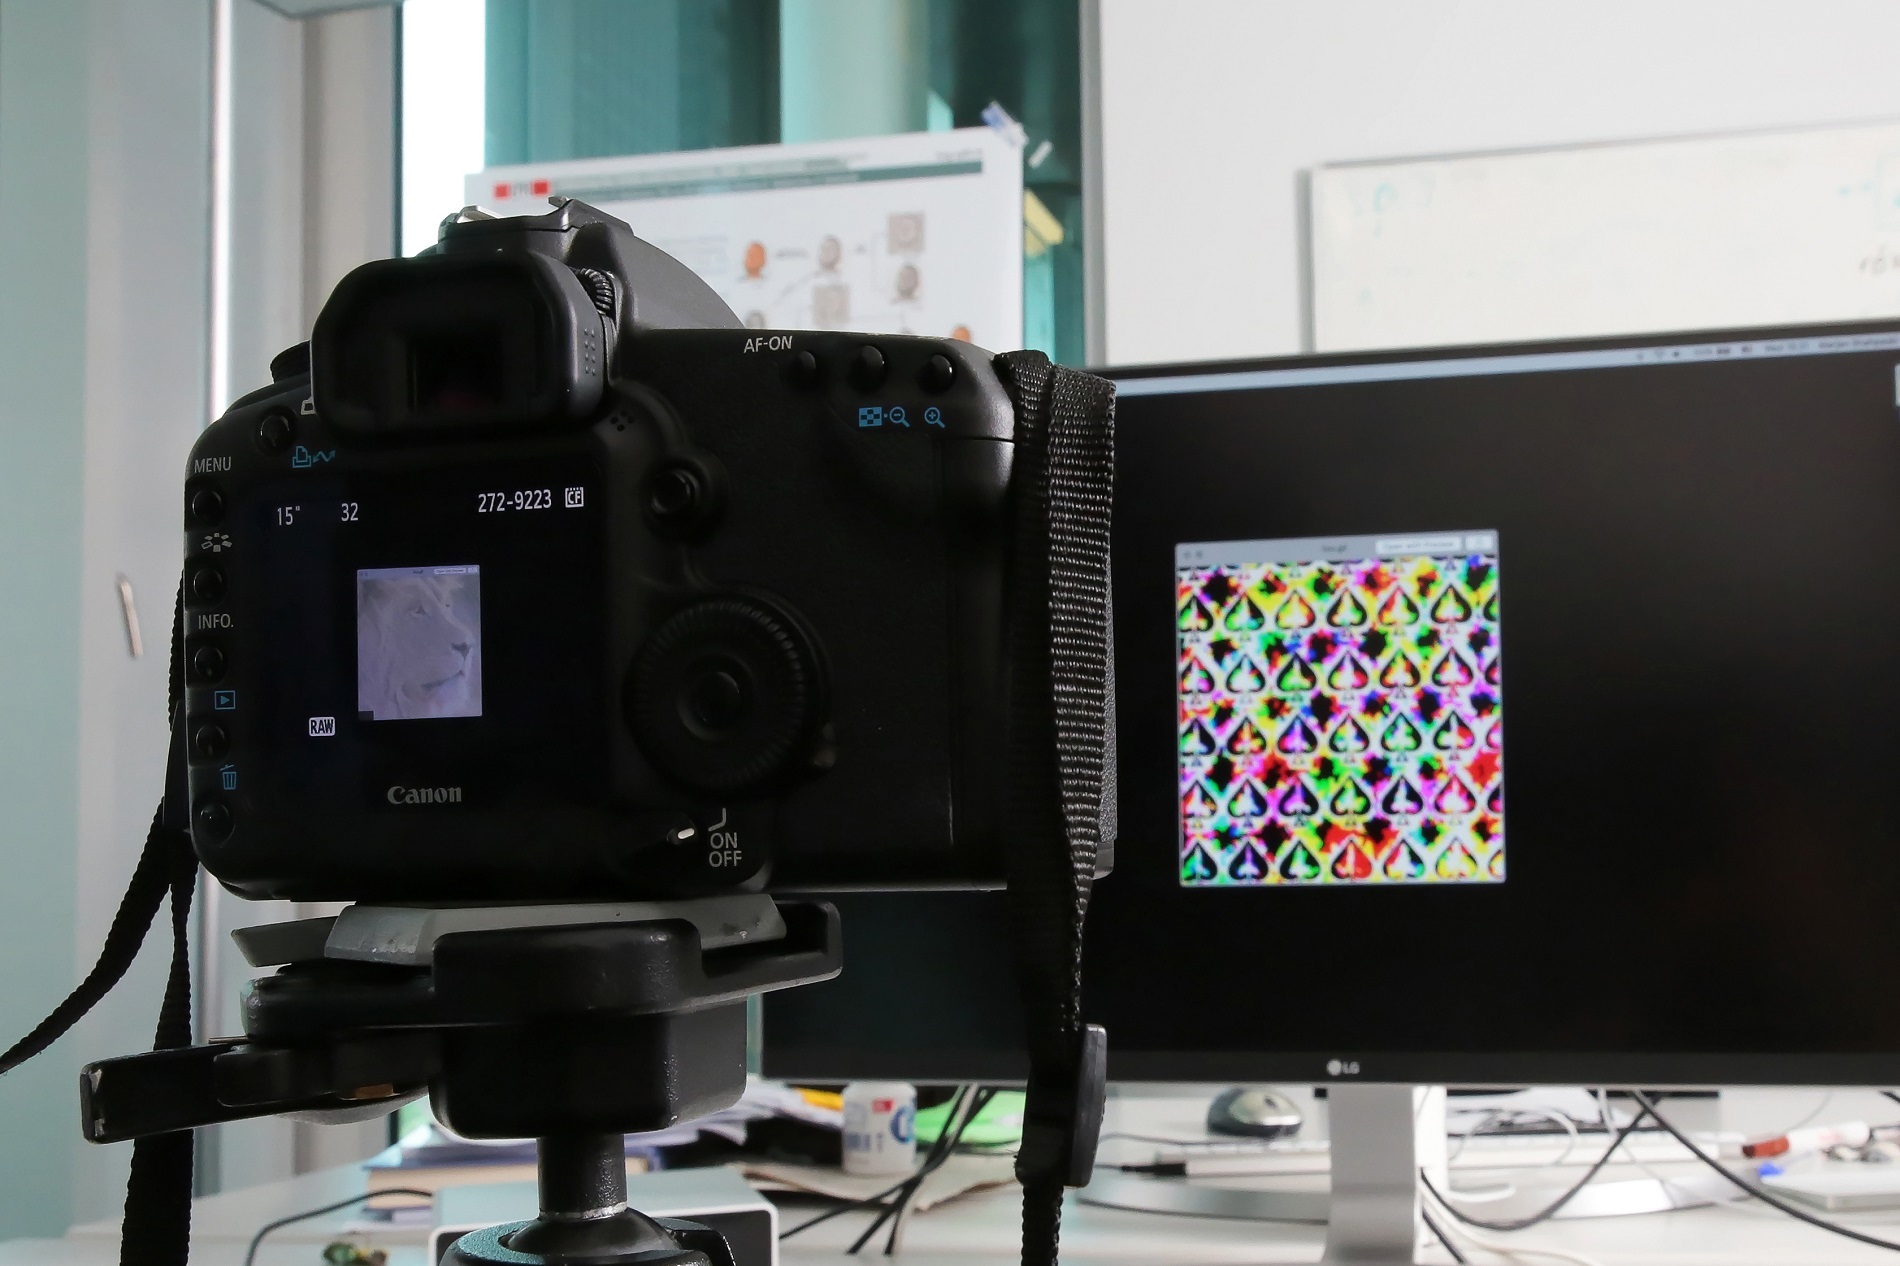 EPFL researchers took advantage of the limits of human vision to hide an image in a video